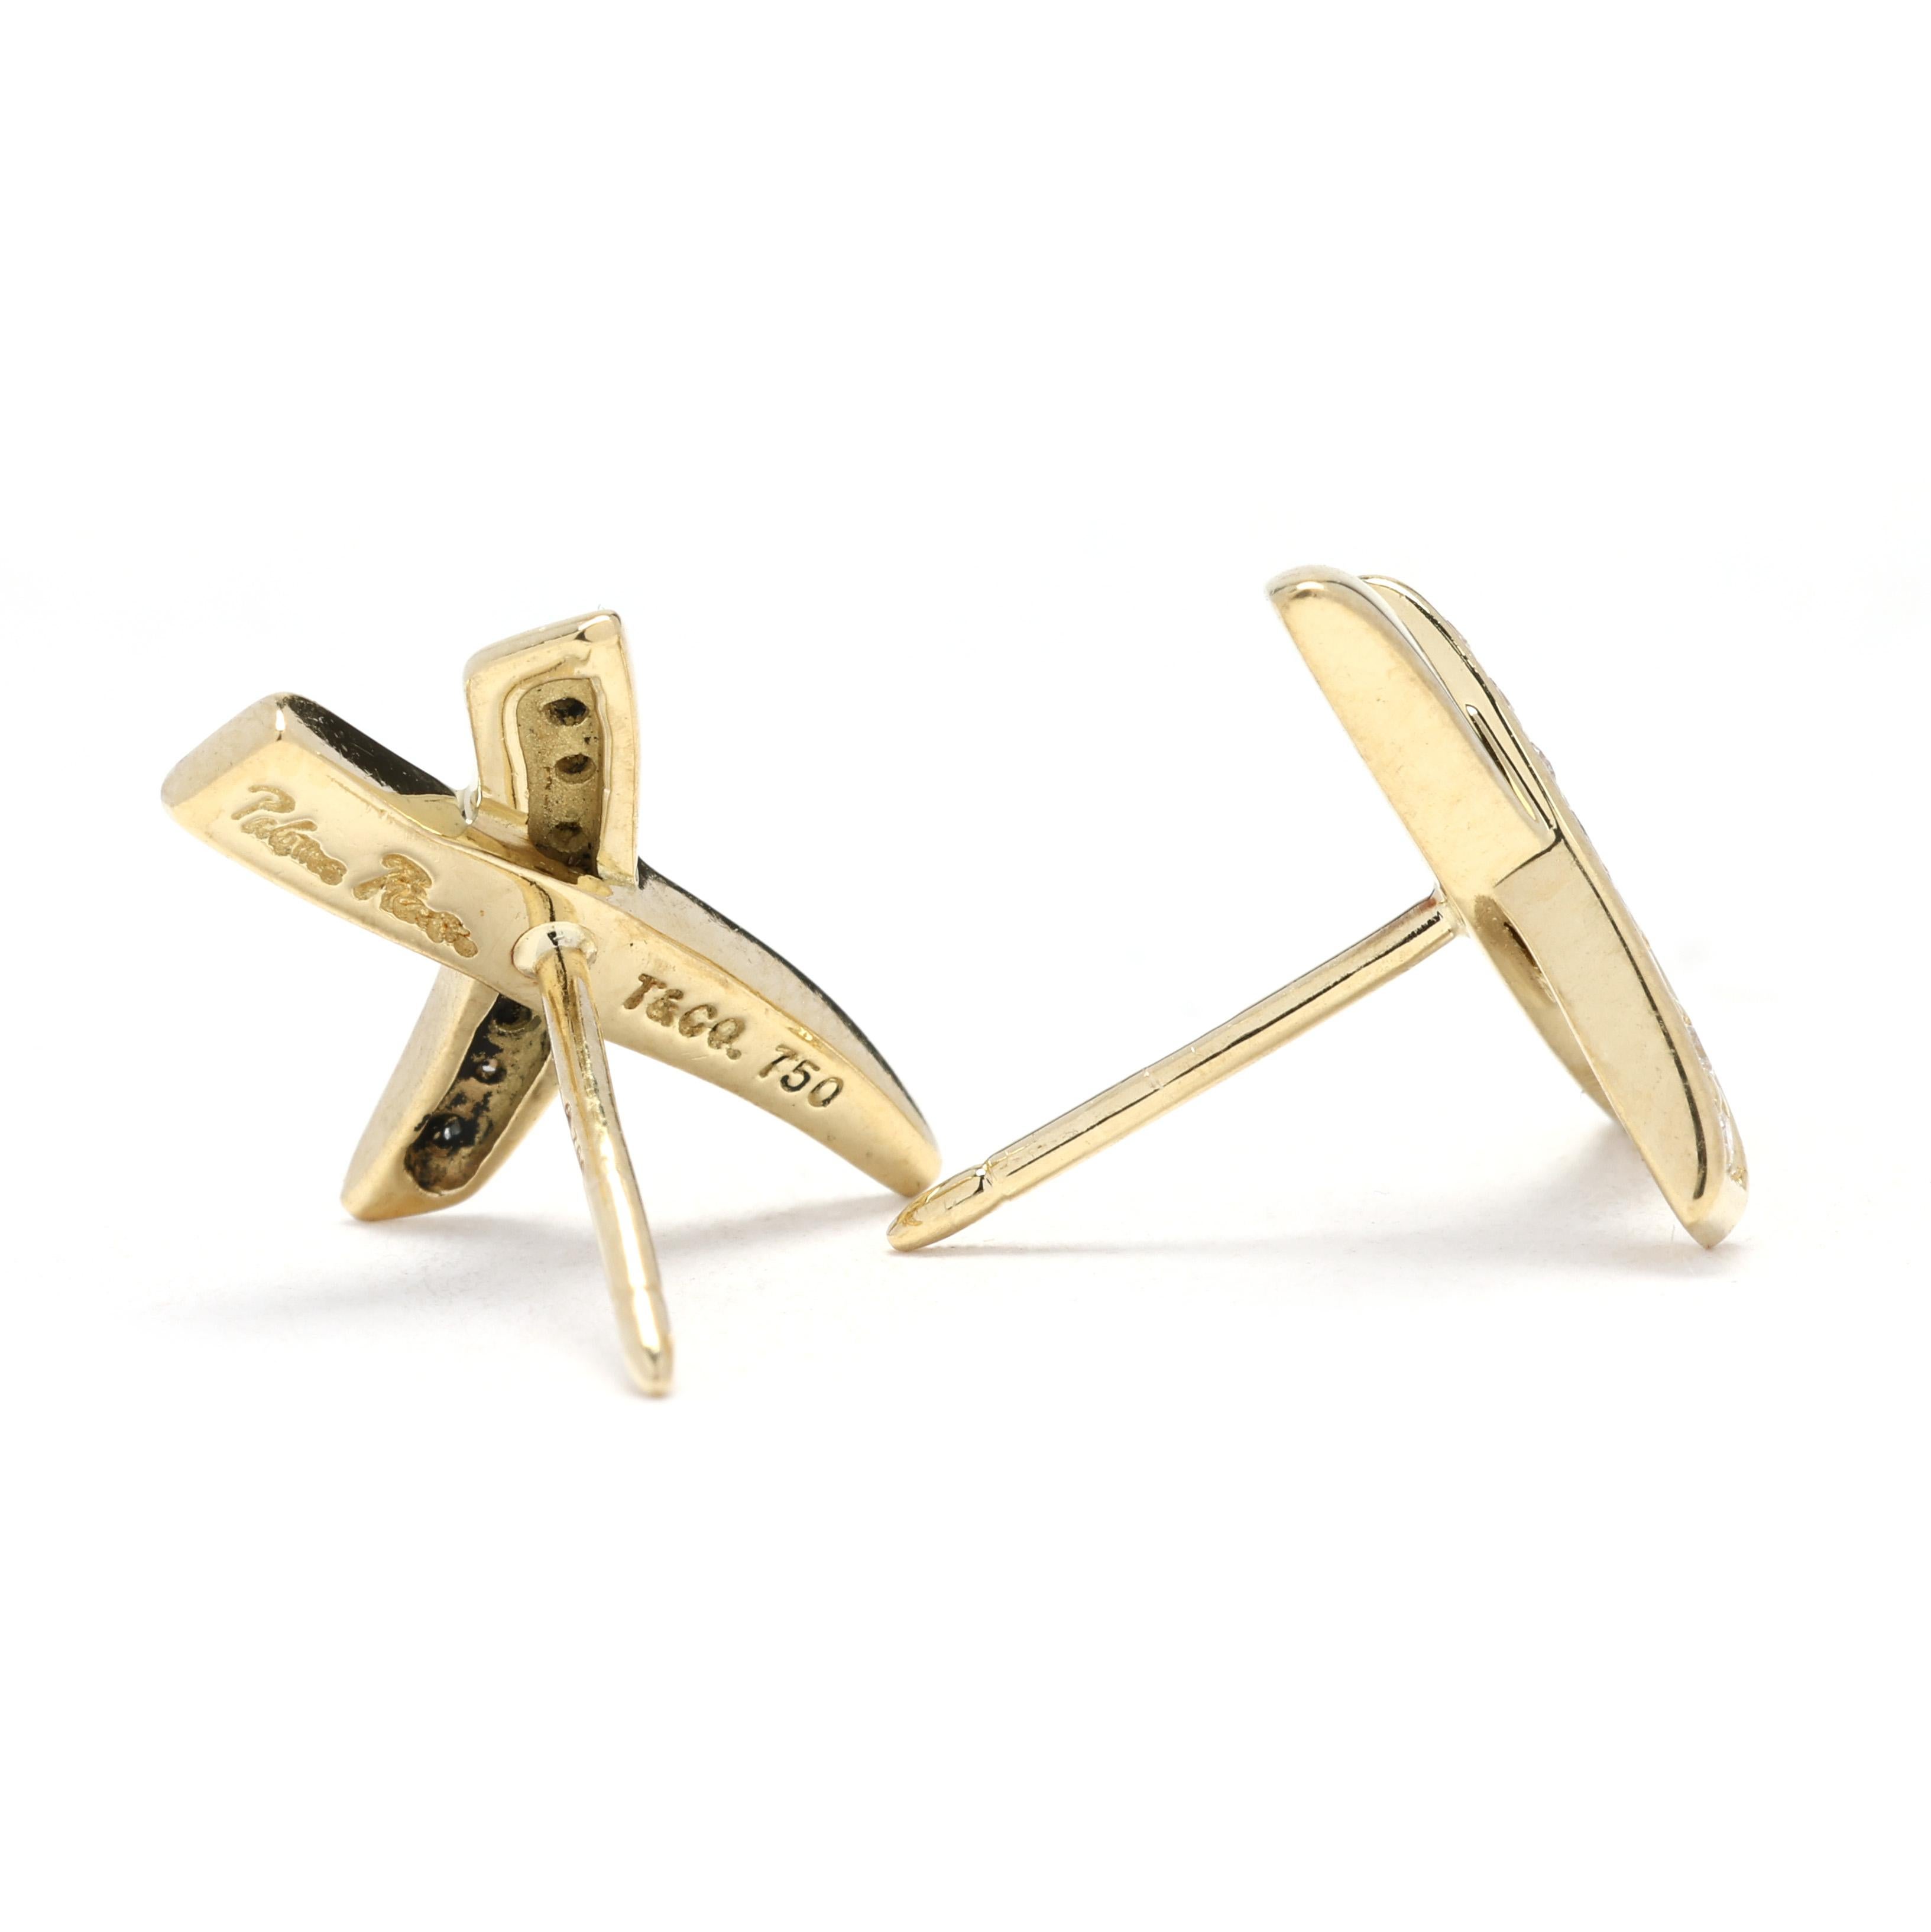 These Paloma Picasso diamond X studs are a stunning pair of statement earrings that will elevate any look. Made from 18k yellow gold, these earrings feature a unique design with a diamond-encrusted X shape. The diamonds add a touch of sparkle and